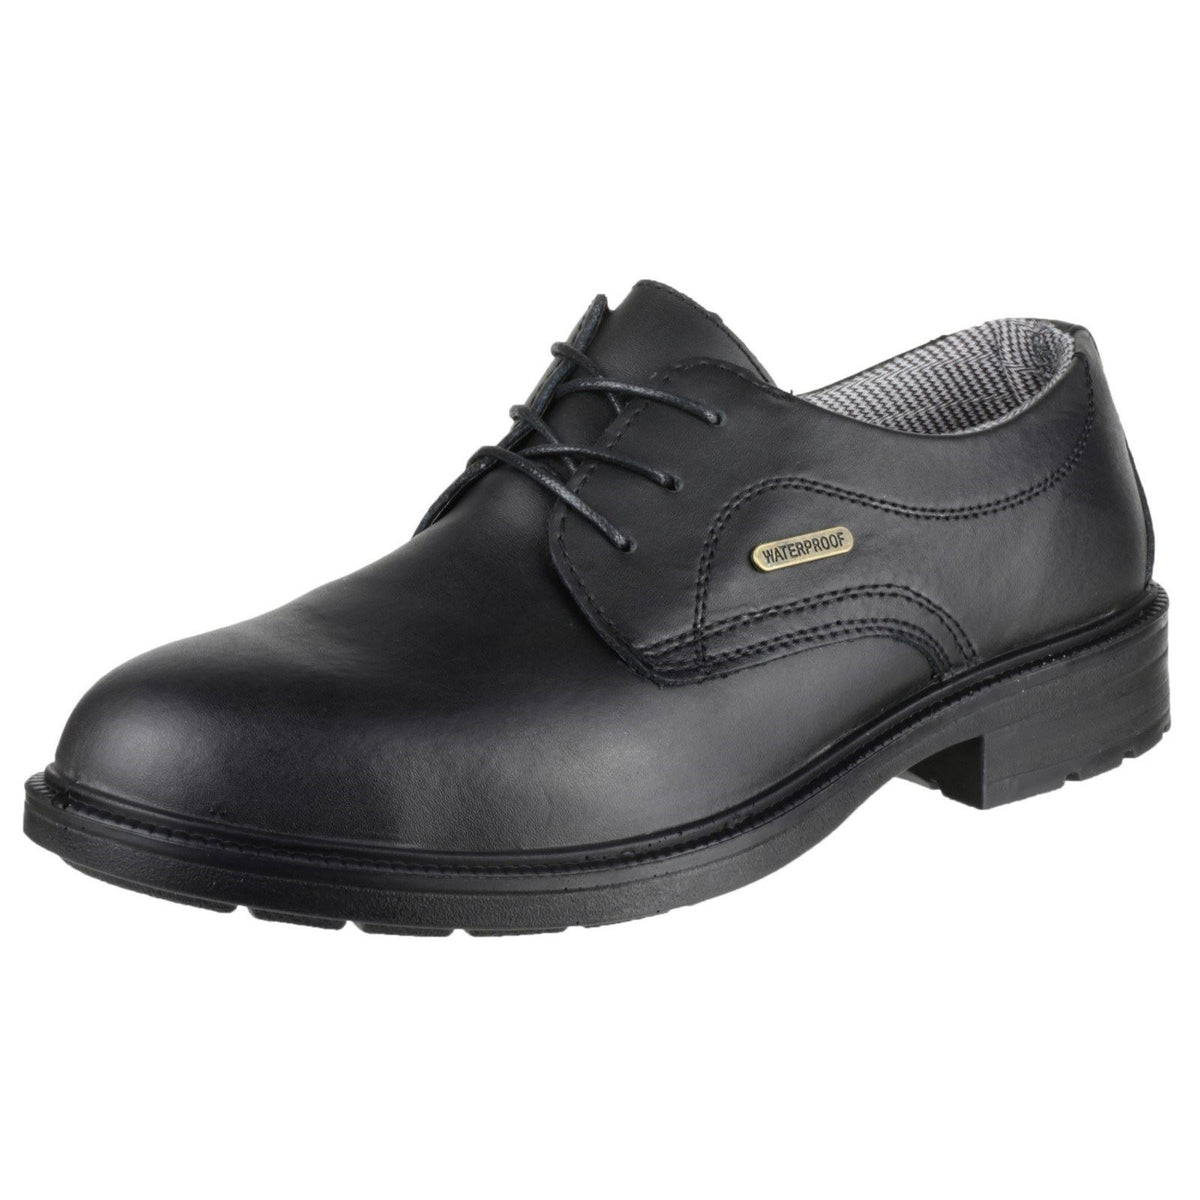 Amblers Safety FS62 Gibson Safety Shoes